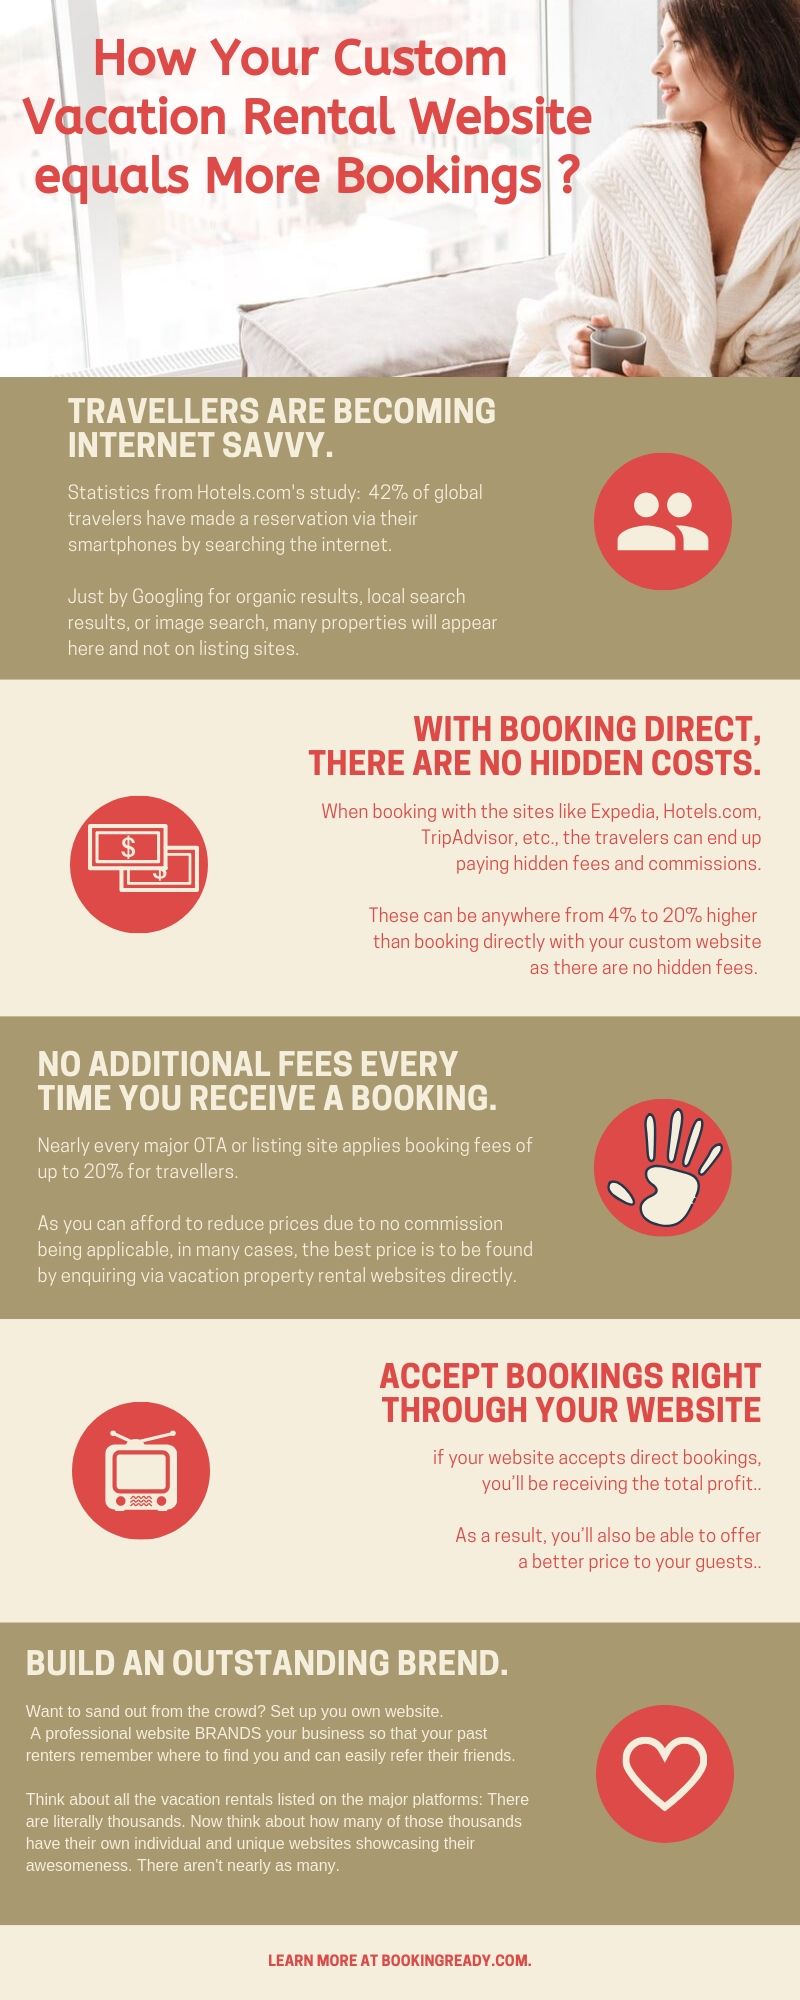 Vacation rental property website - Infographic